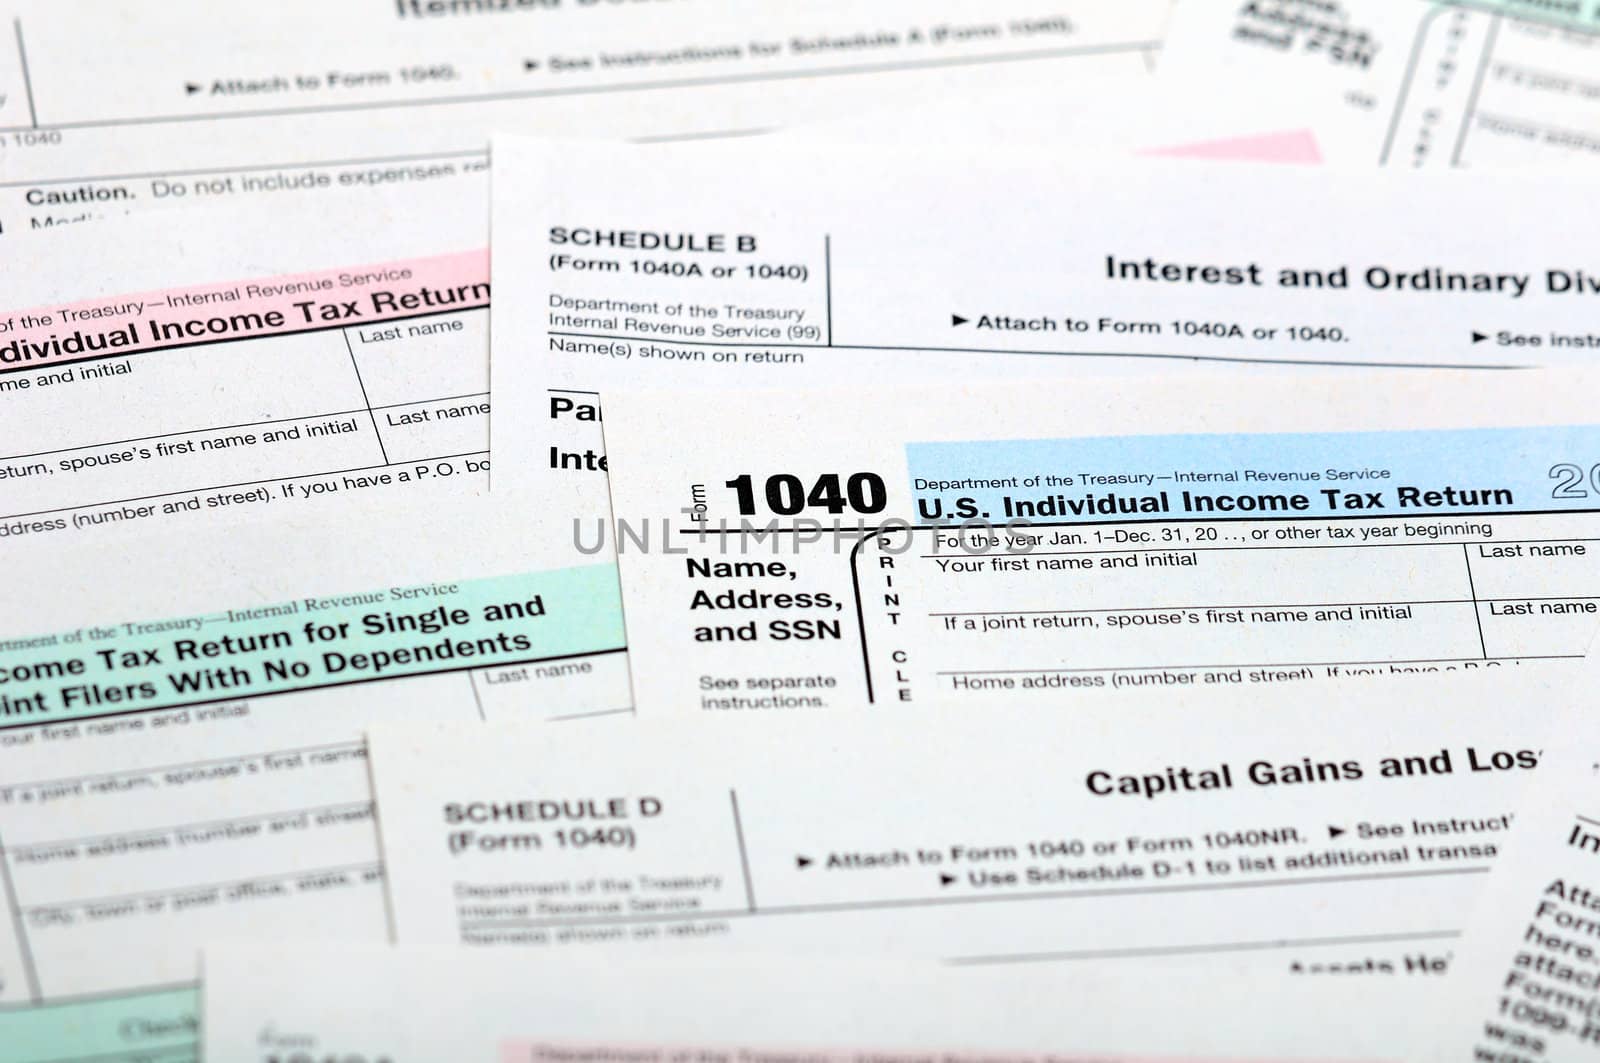 Income Tax Return forms 1040 and Schedules.